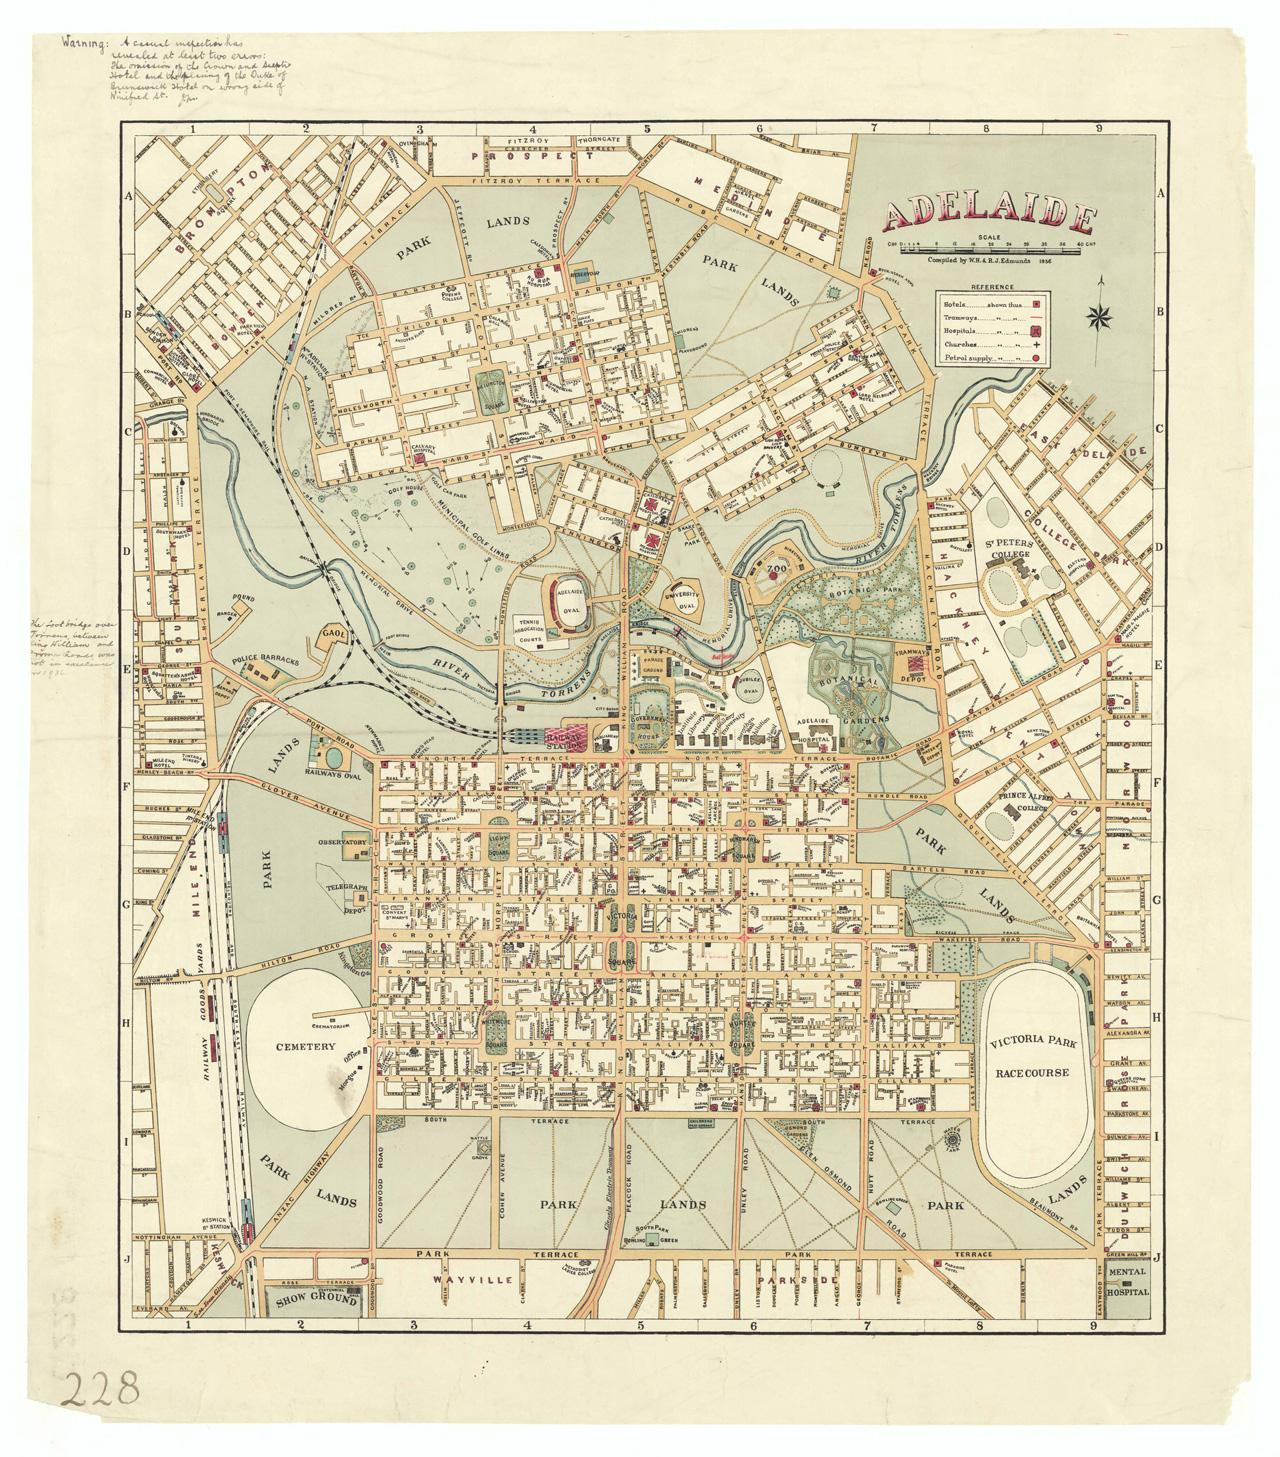 Adelaide, 1936. SLSA: Map Collection C 228/1